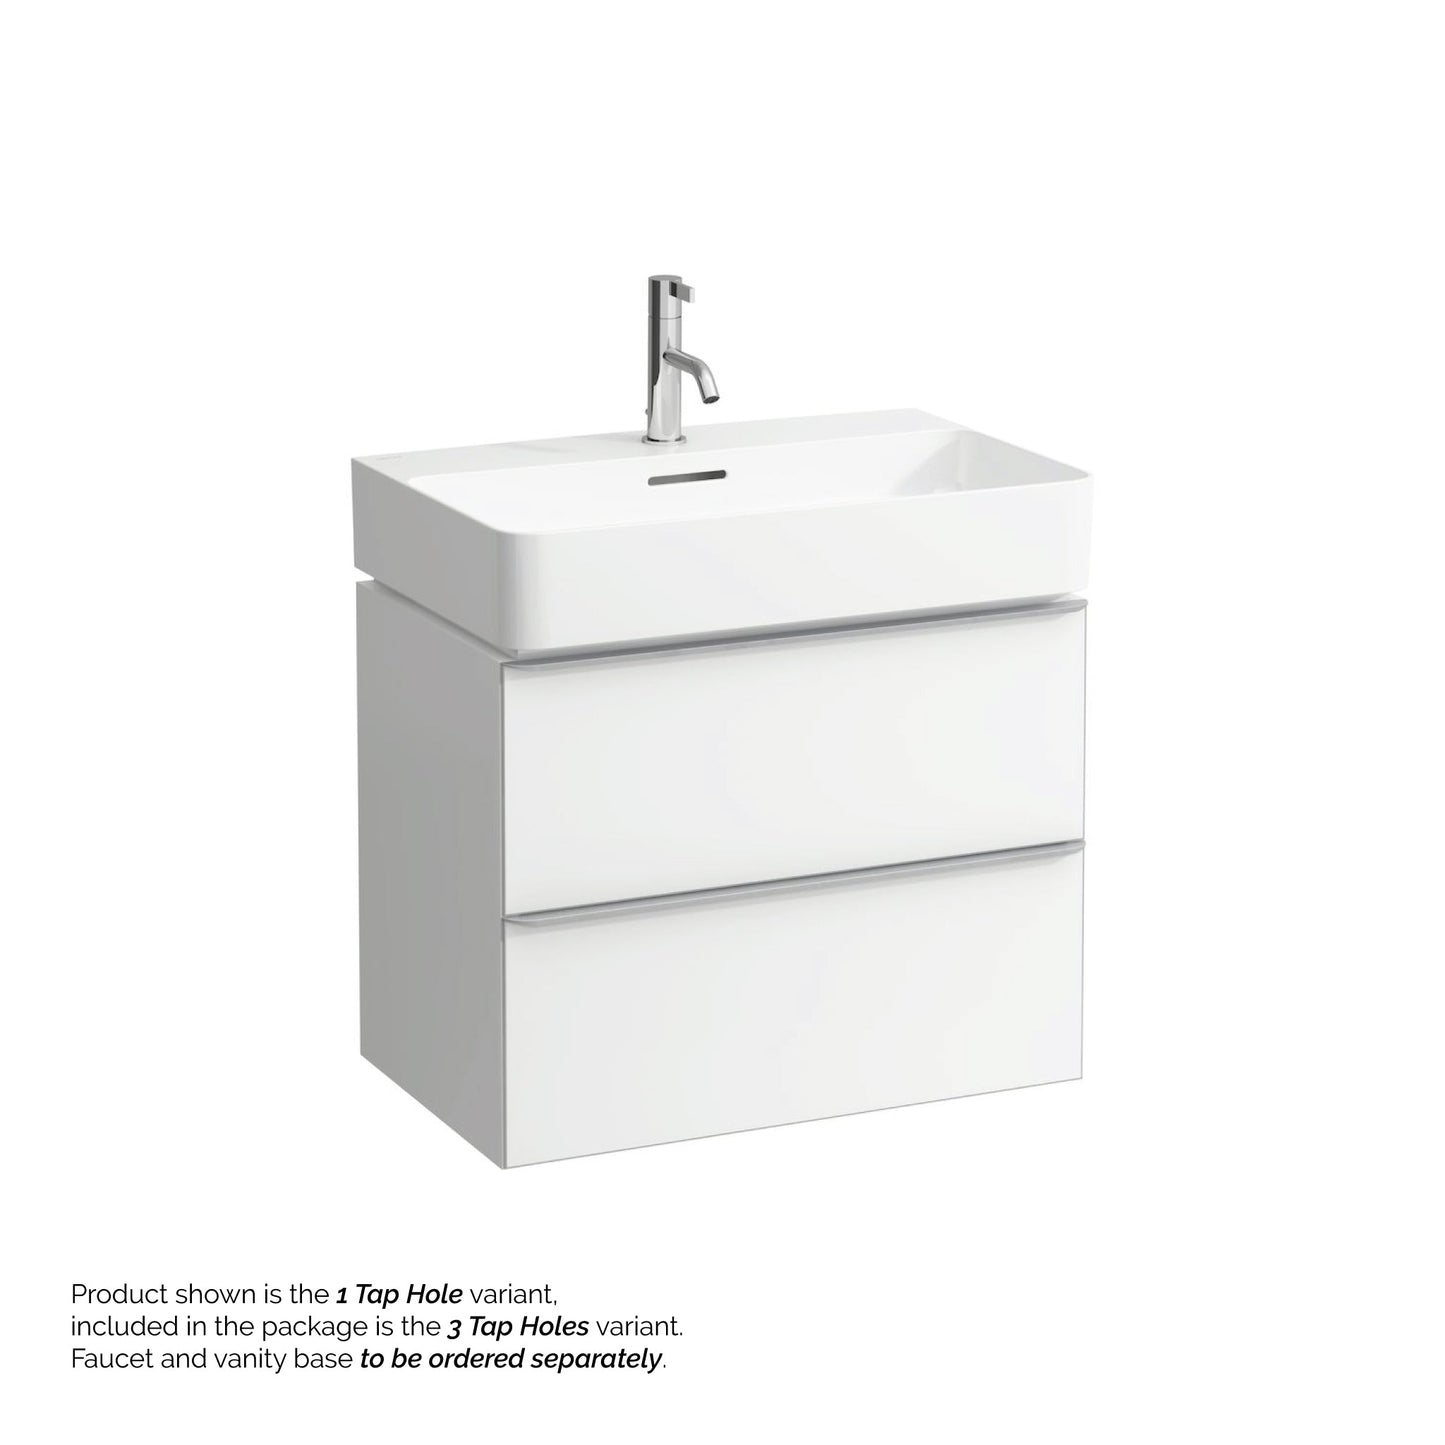 Laufen Val 26" x 17" Matte White Ceramic Wall-Mounted Bathroom Sink With 3 Faucet Holes